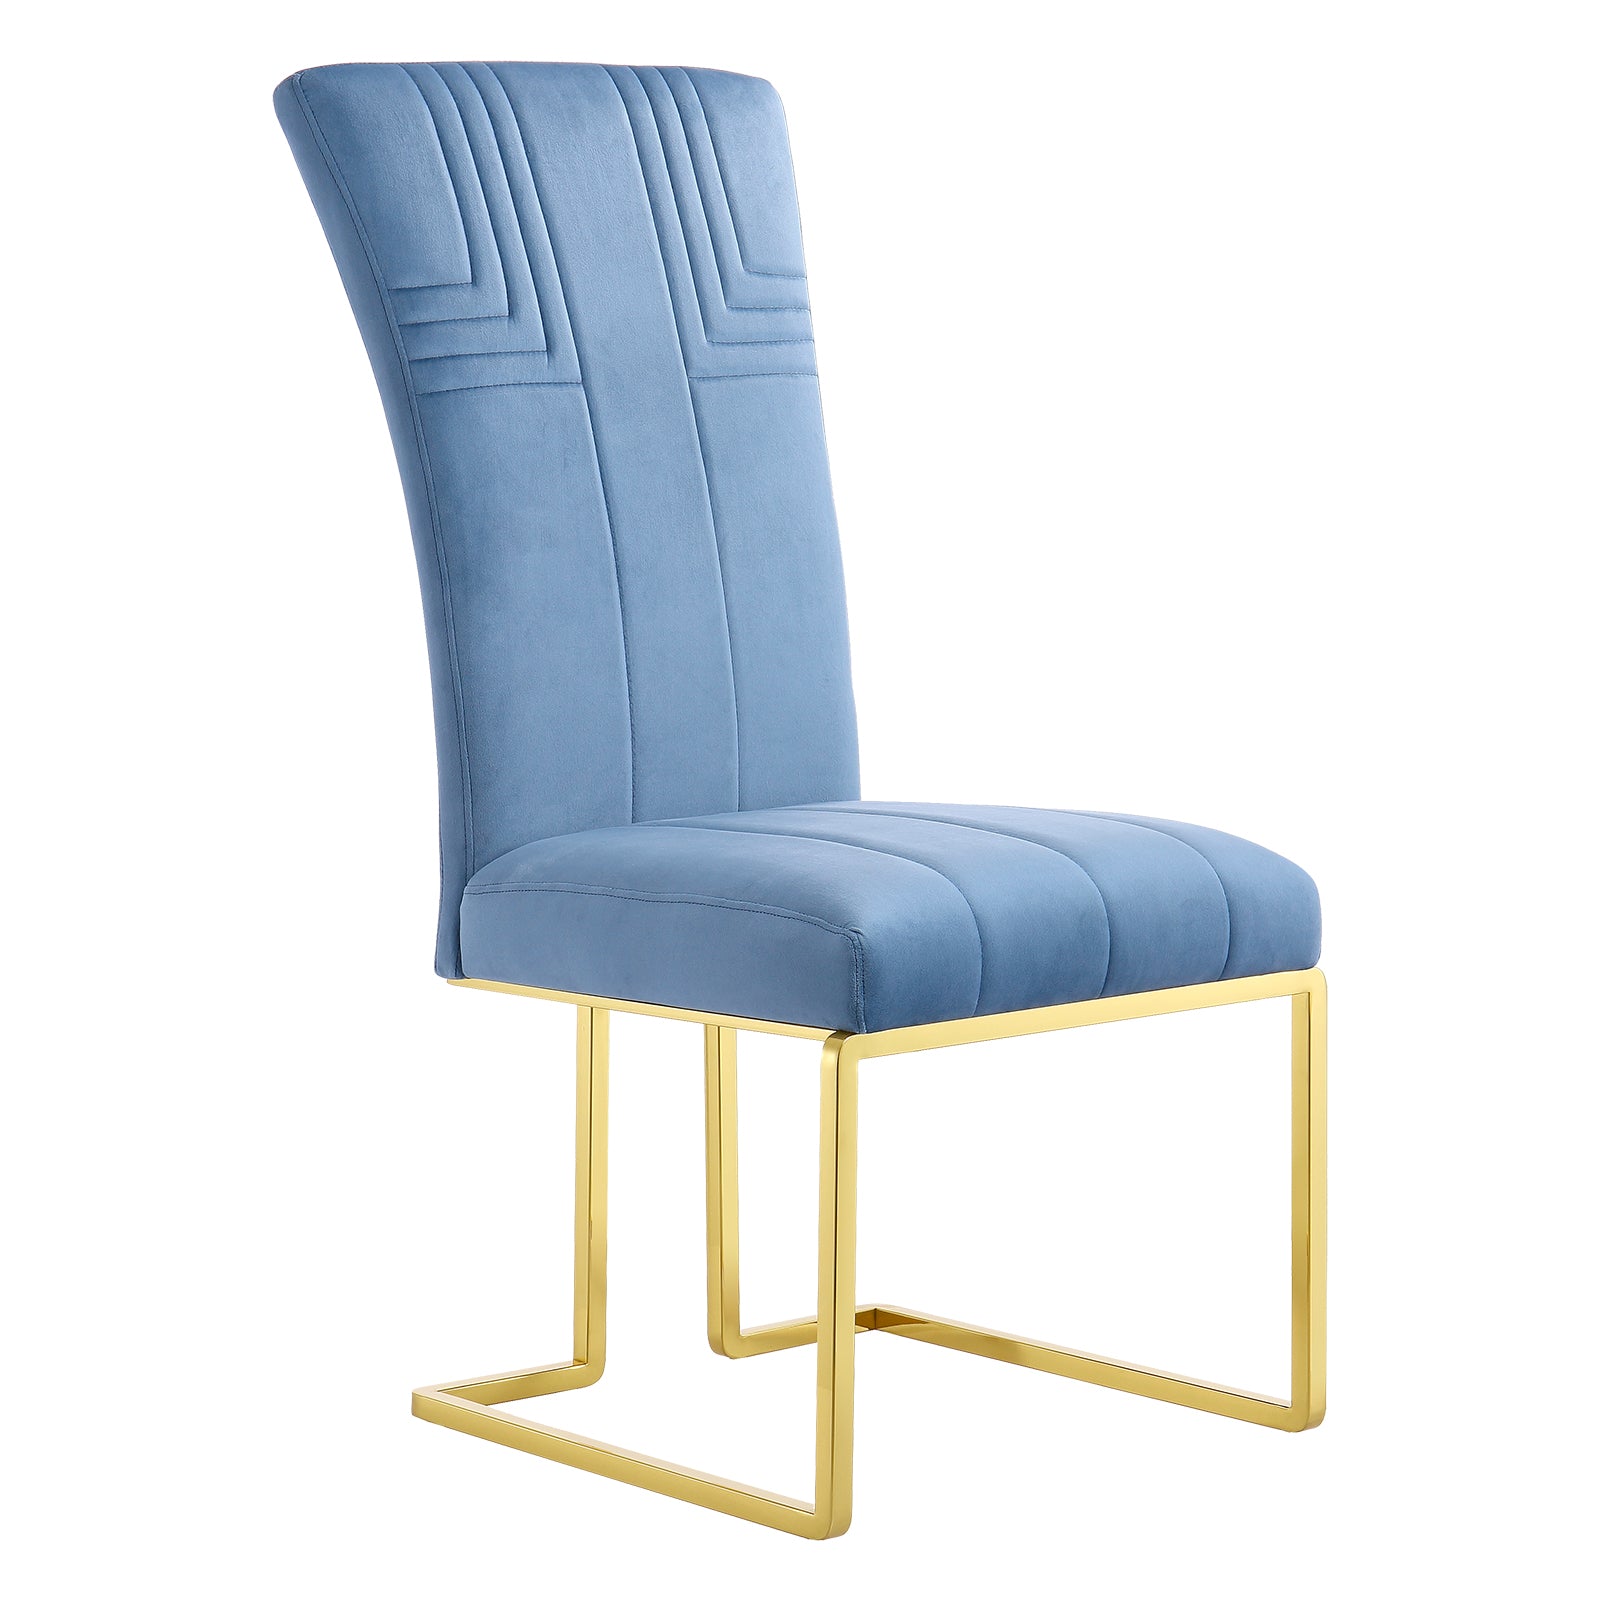 681-Set | AUZ Blue and Gold Dining room Sets for 6